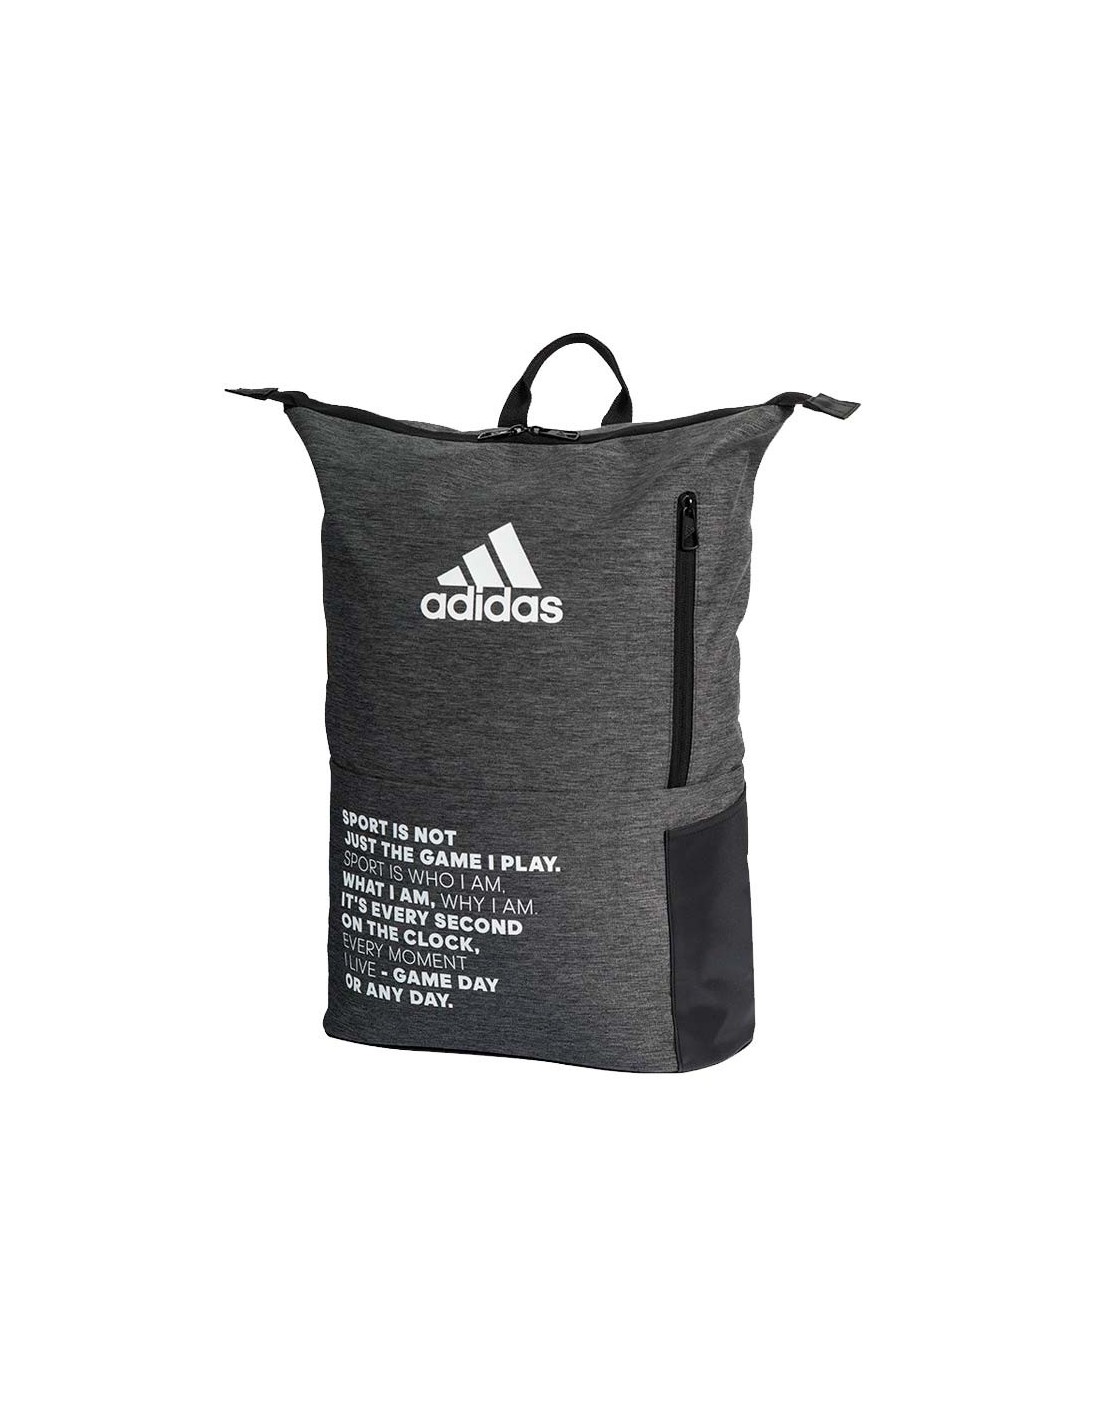 Adidas Multigame 2.0 Backpack Gray / Black | ADIDAS racket bags | T...